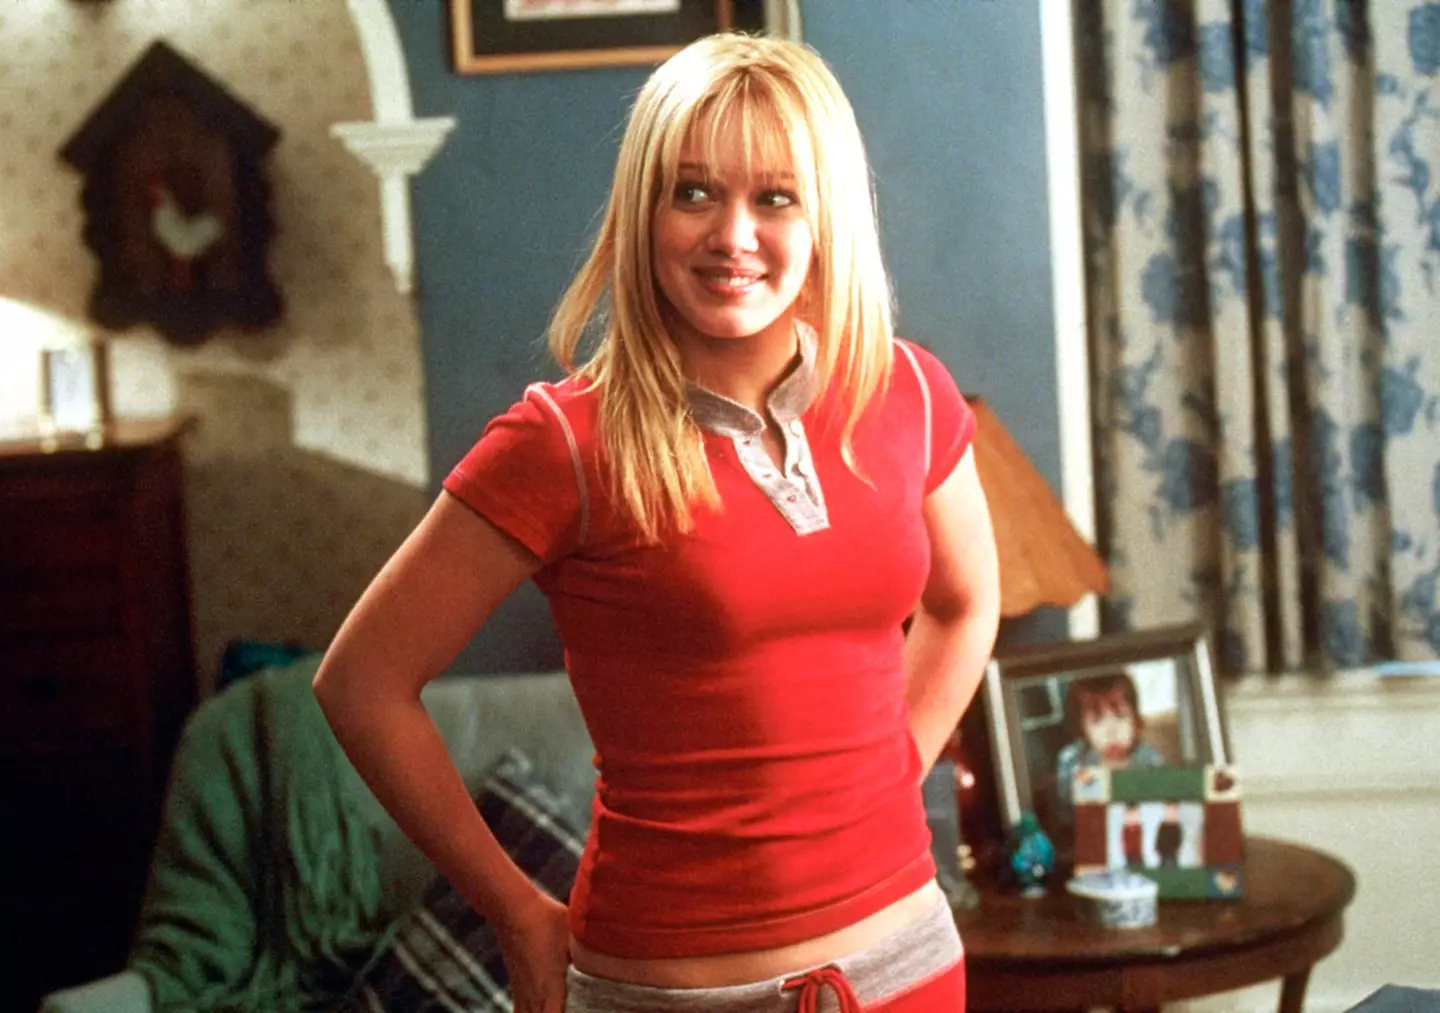 Hilary Duff was just 15 when Ashton Kutcher made the 'inappropriate' comments.